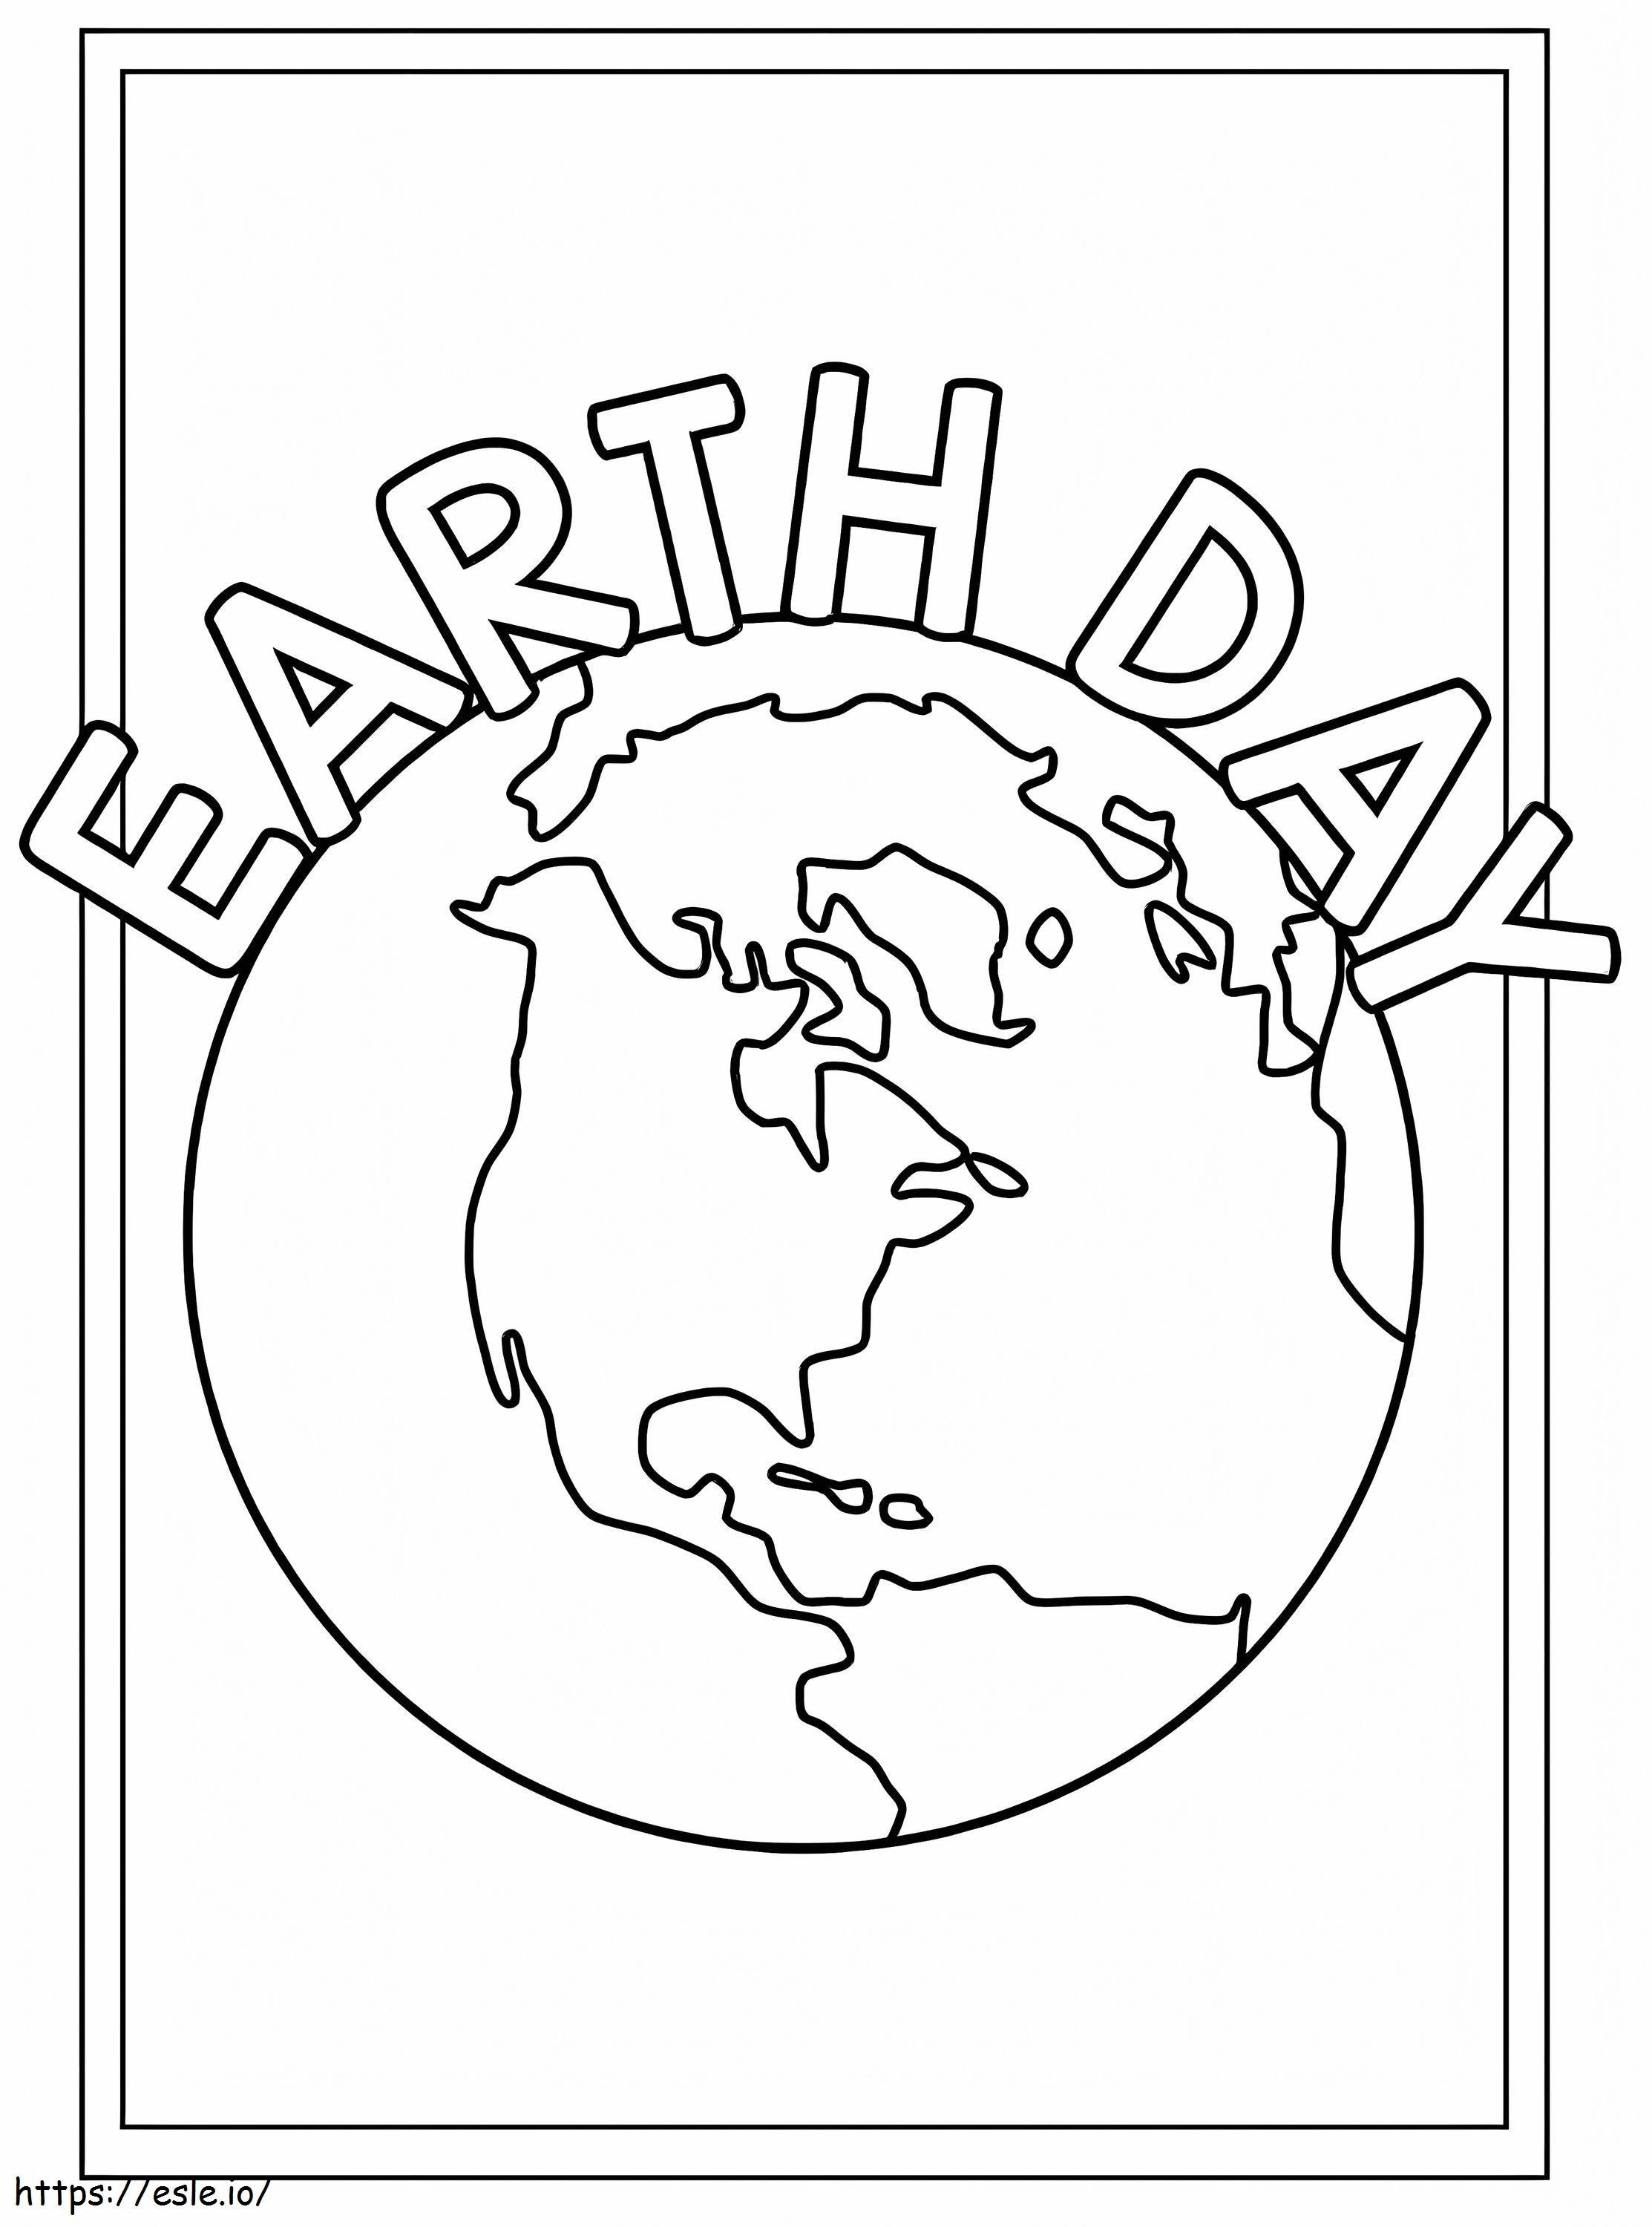 Earth Day With The Earth coloring page